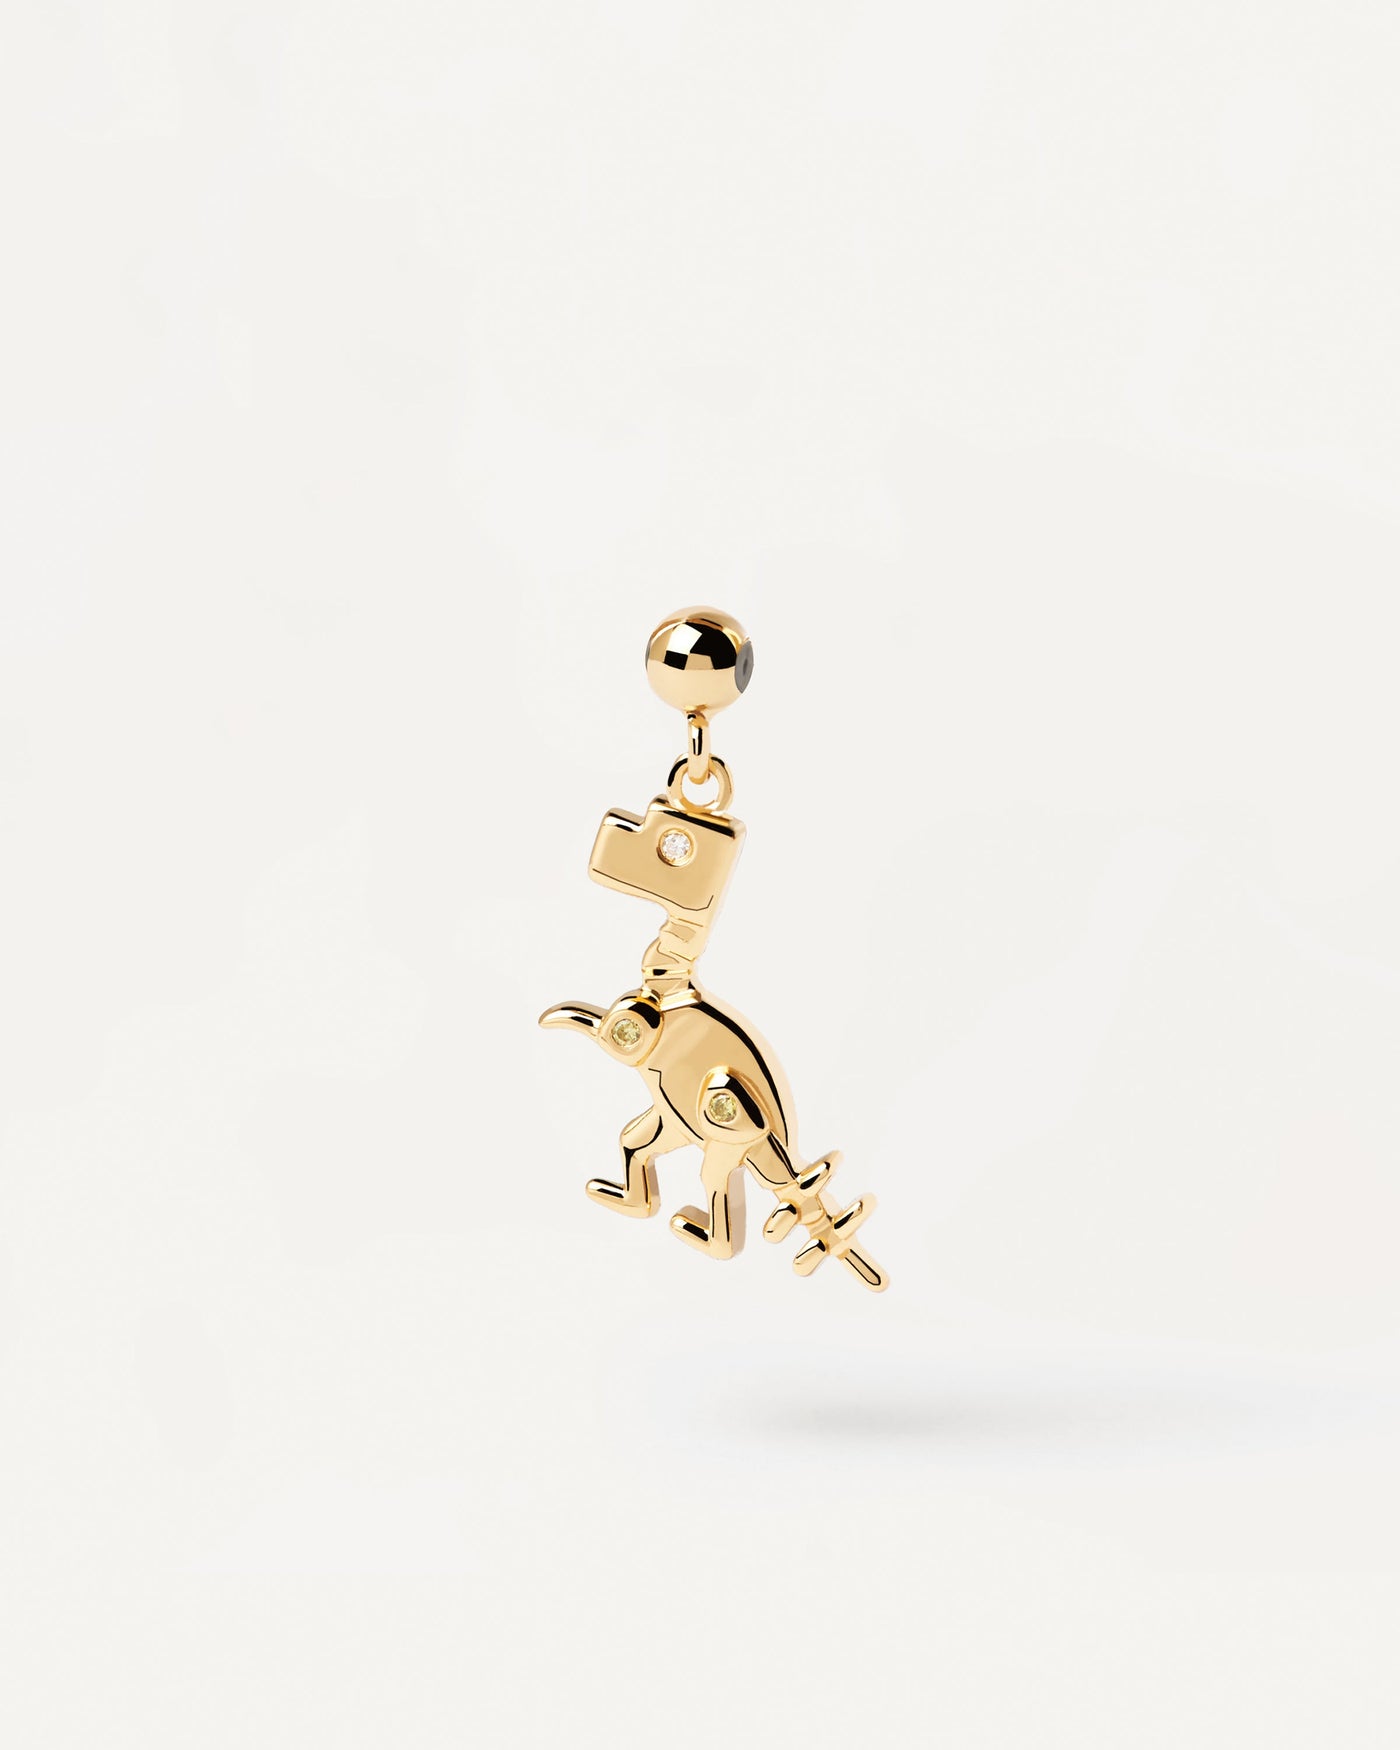 2023 Selection | Dino Charm. Gold-plated silver dinosaure pendant for Charm necklace or bracelet with white zirconia. Get the latest arrival from PDPAOLA. Place your order safely and get this Best Seller. Free Shipping.